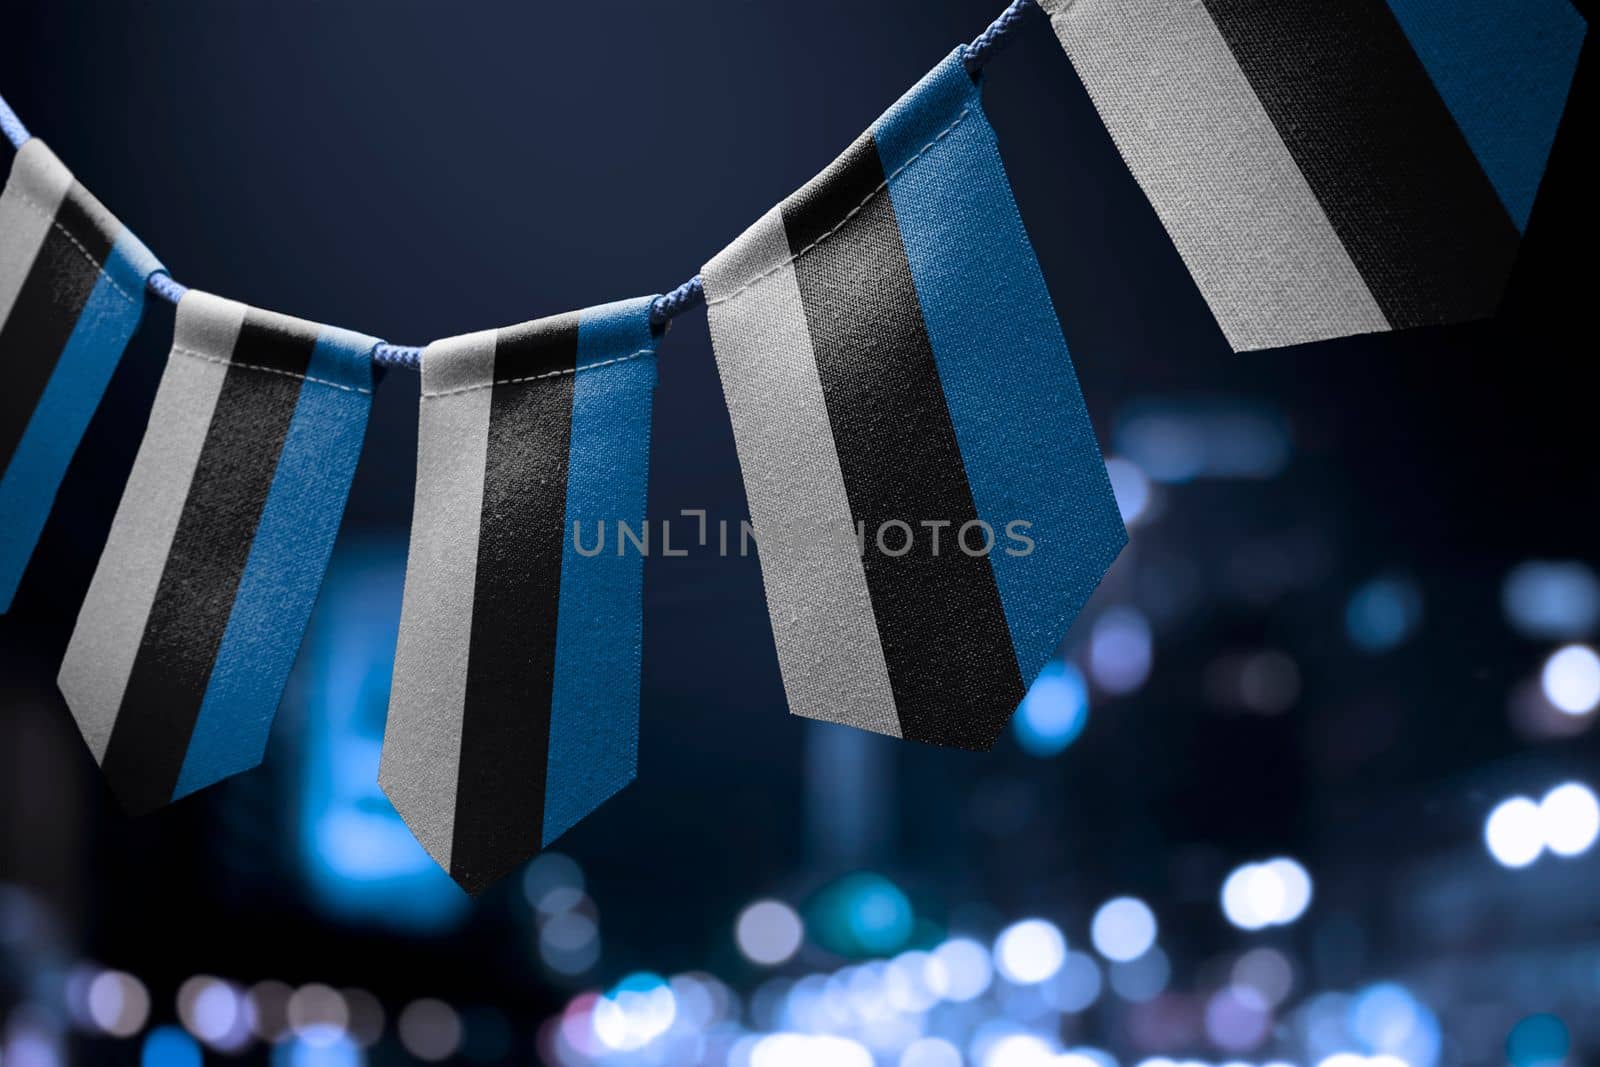 A garland of Estonia national flags on an abstract blurred background.